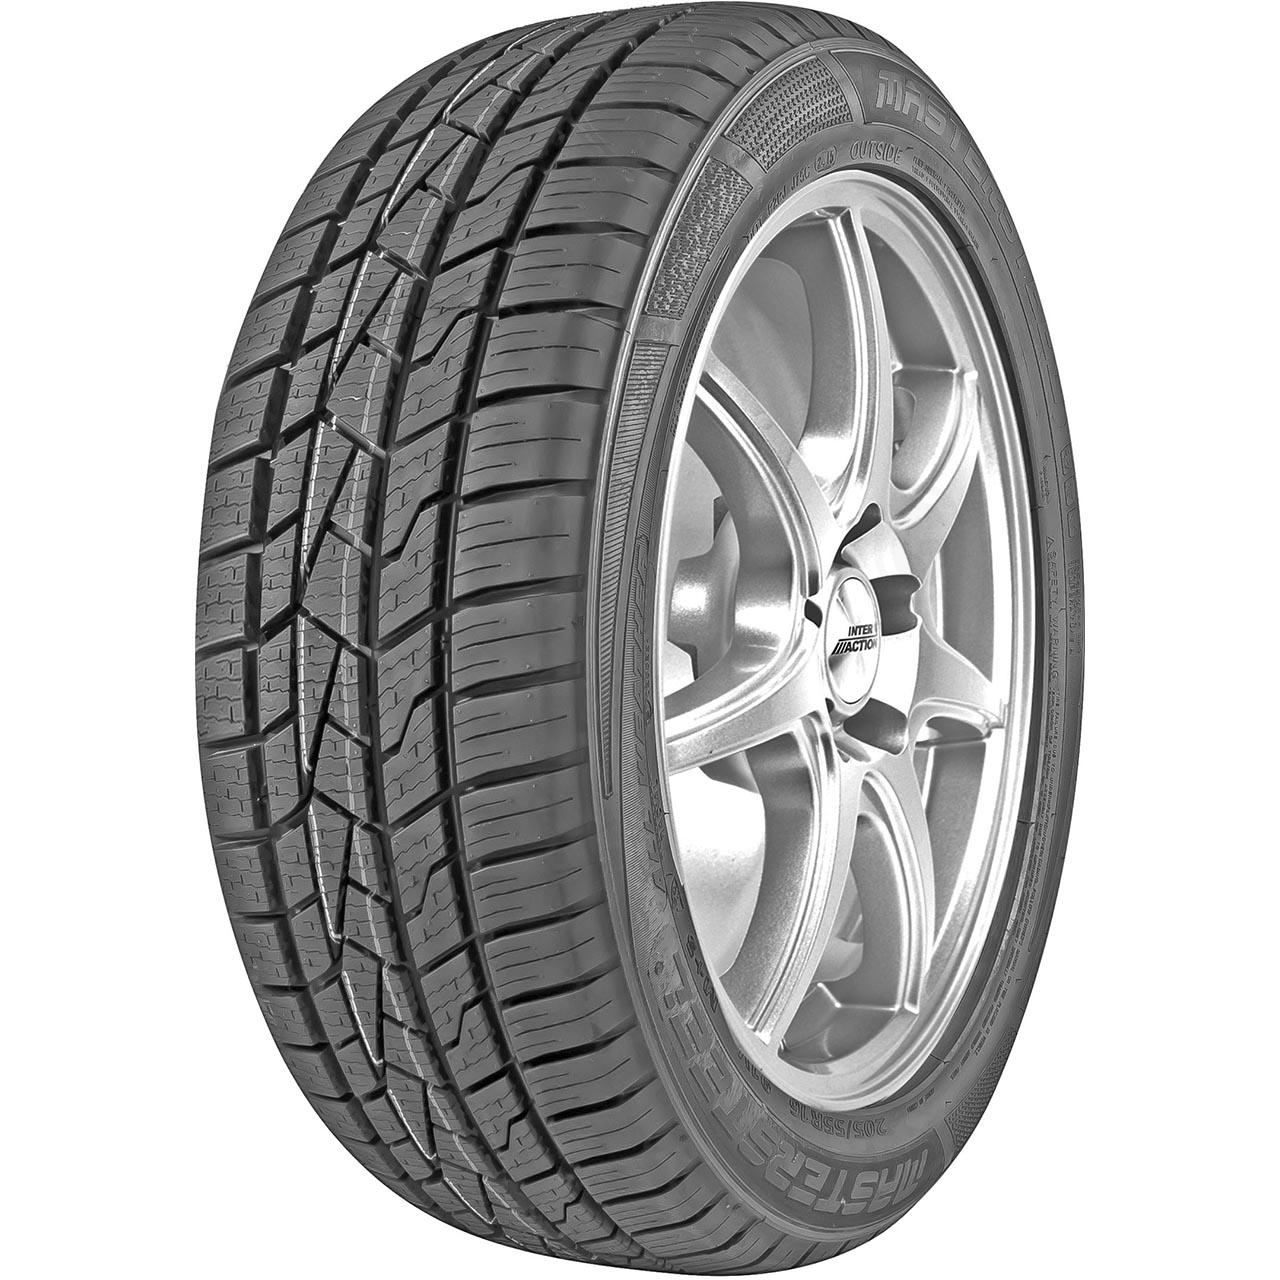 Mastersteel ALL Weather 155/70R13 75T